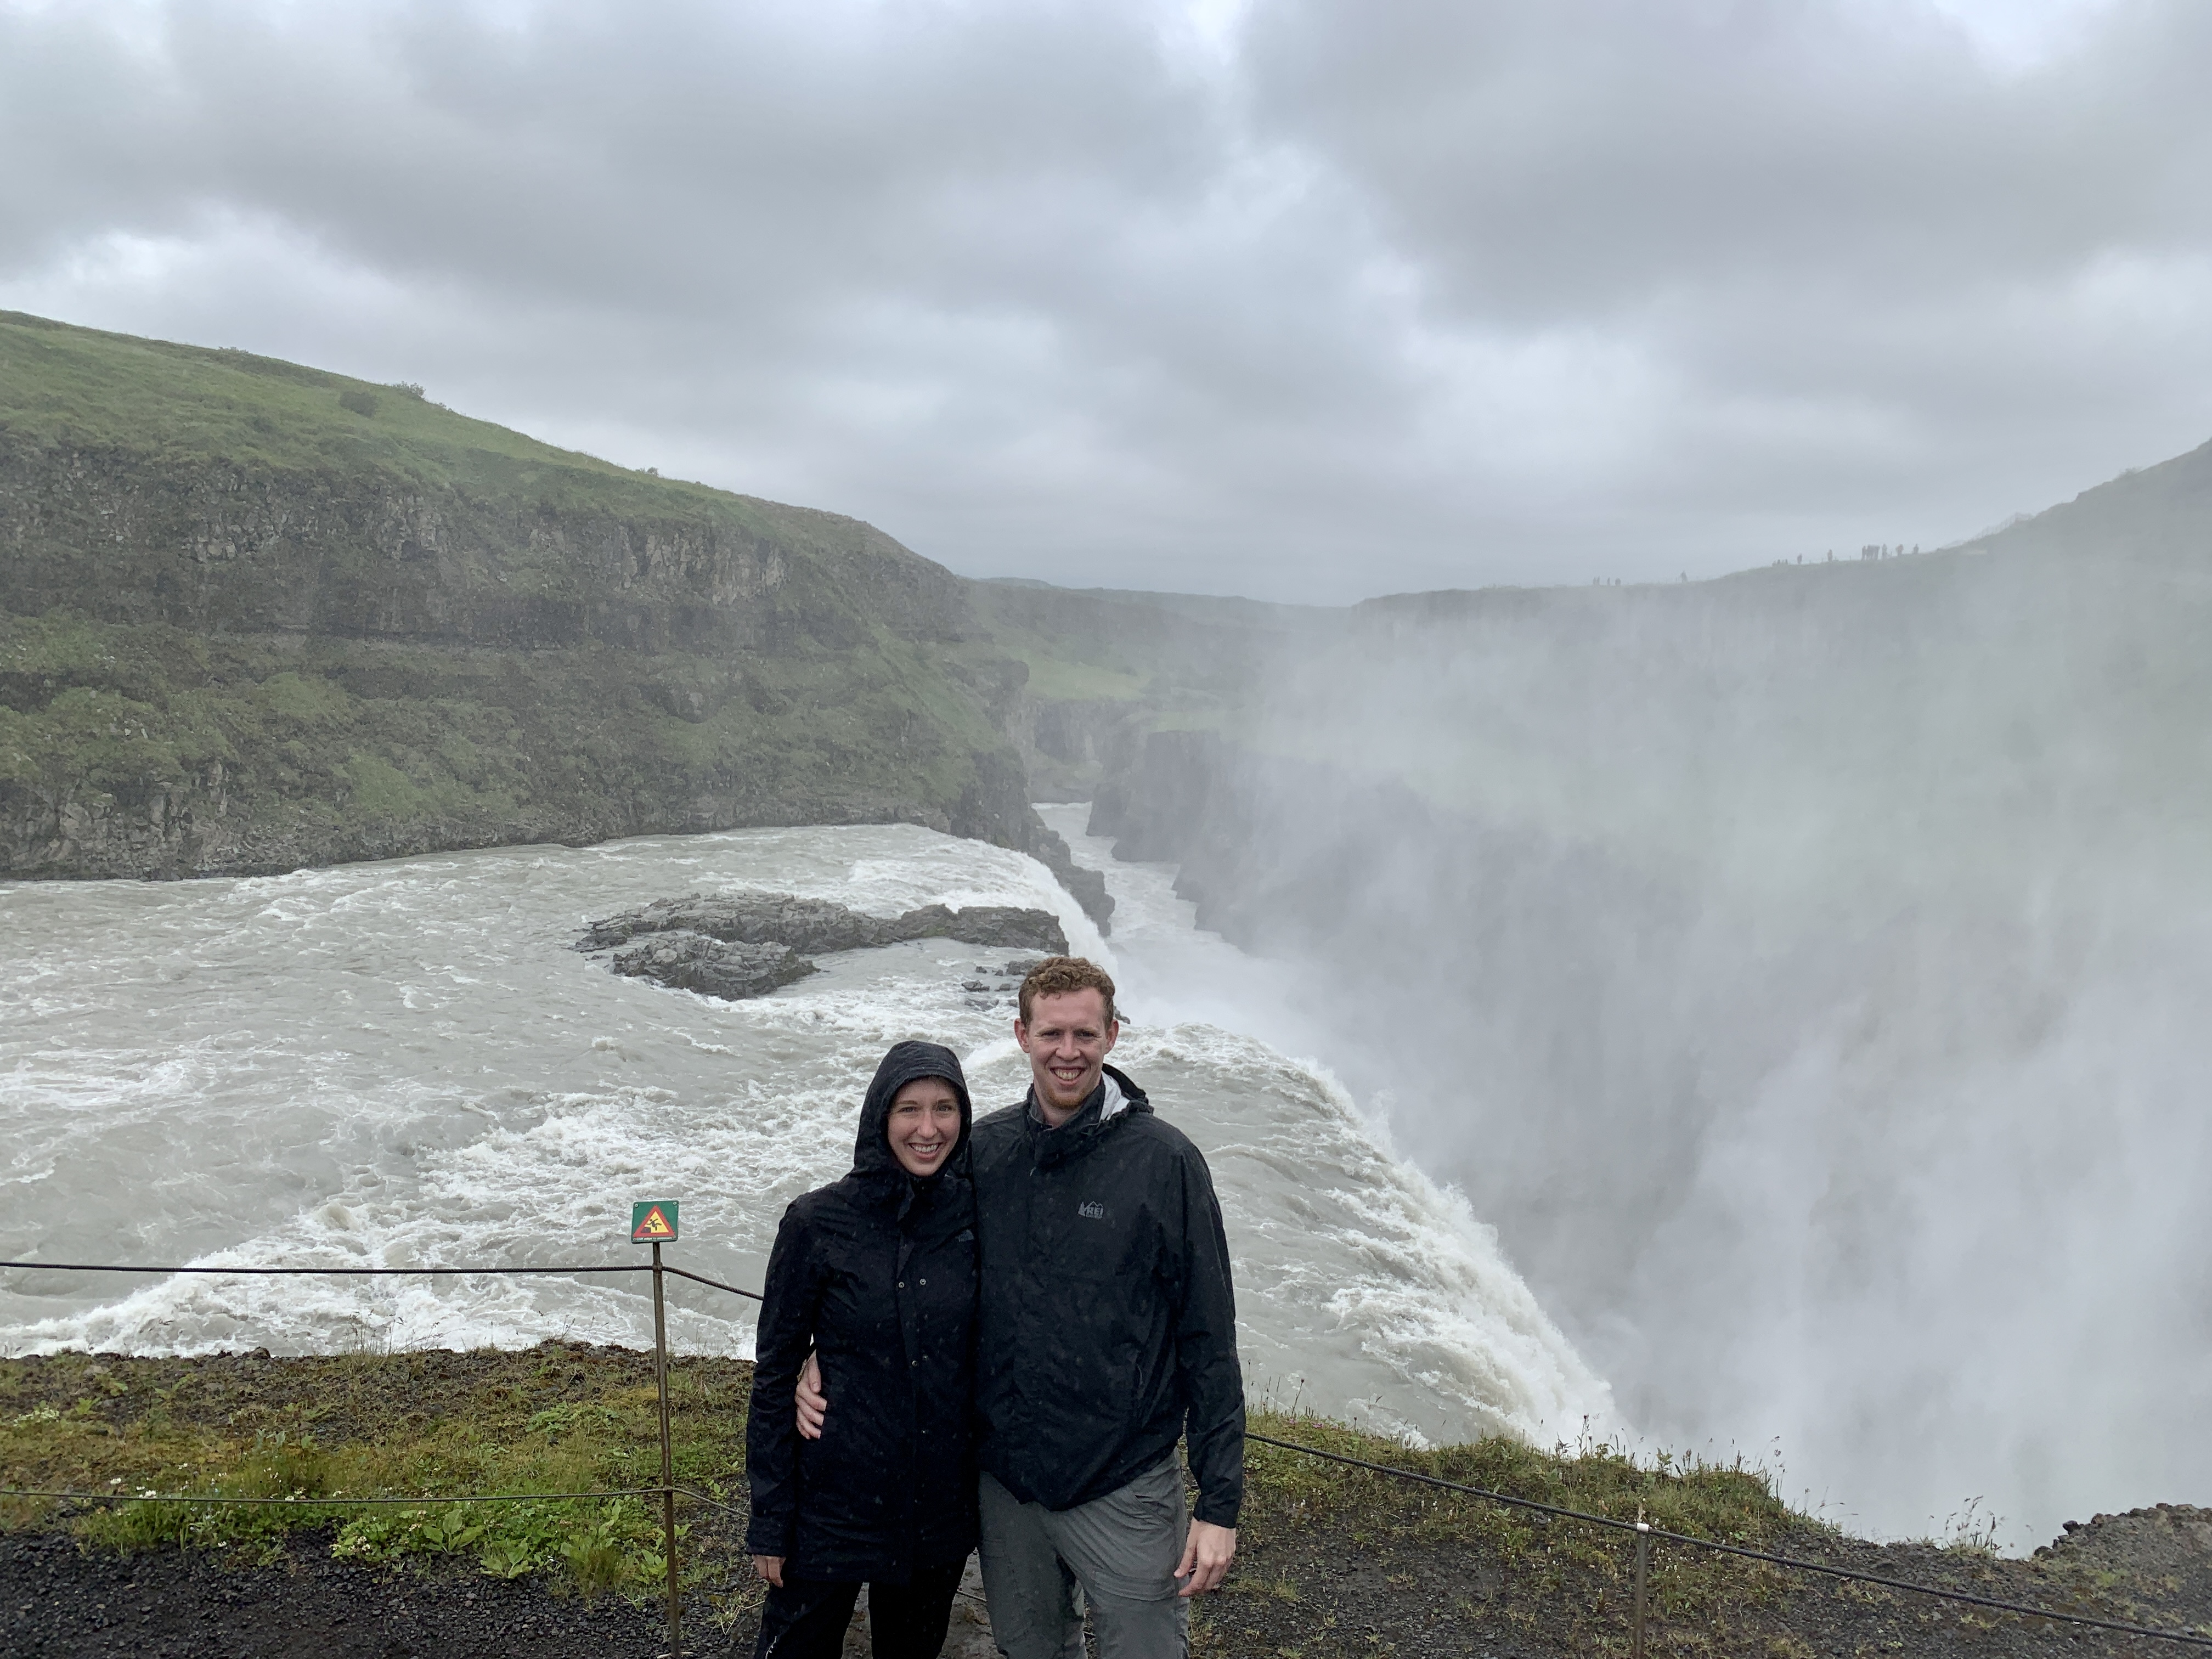 Amanda & Mark next to the steepest part of the Gullfoss Waterfall, surrounded by mist. 